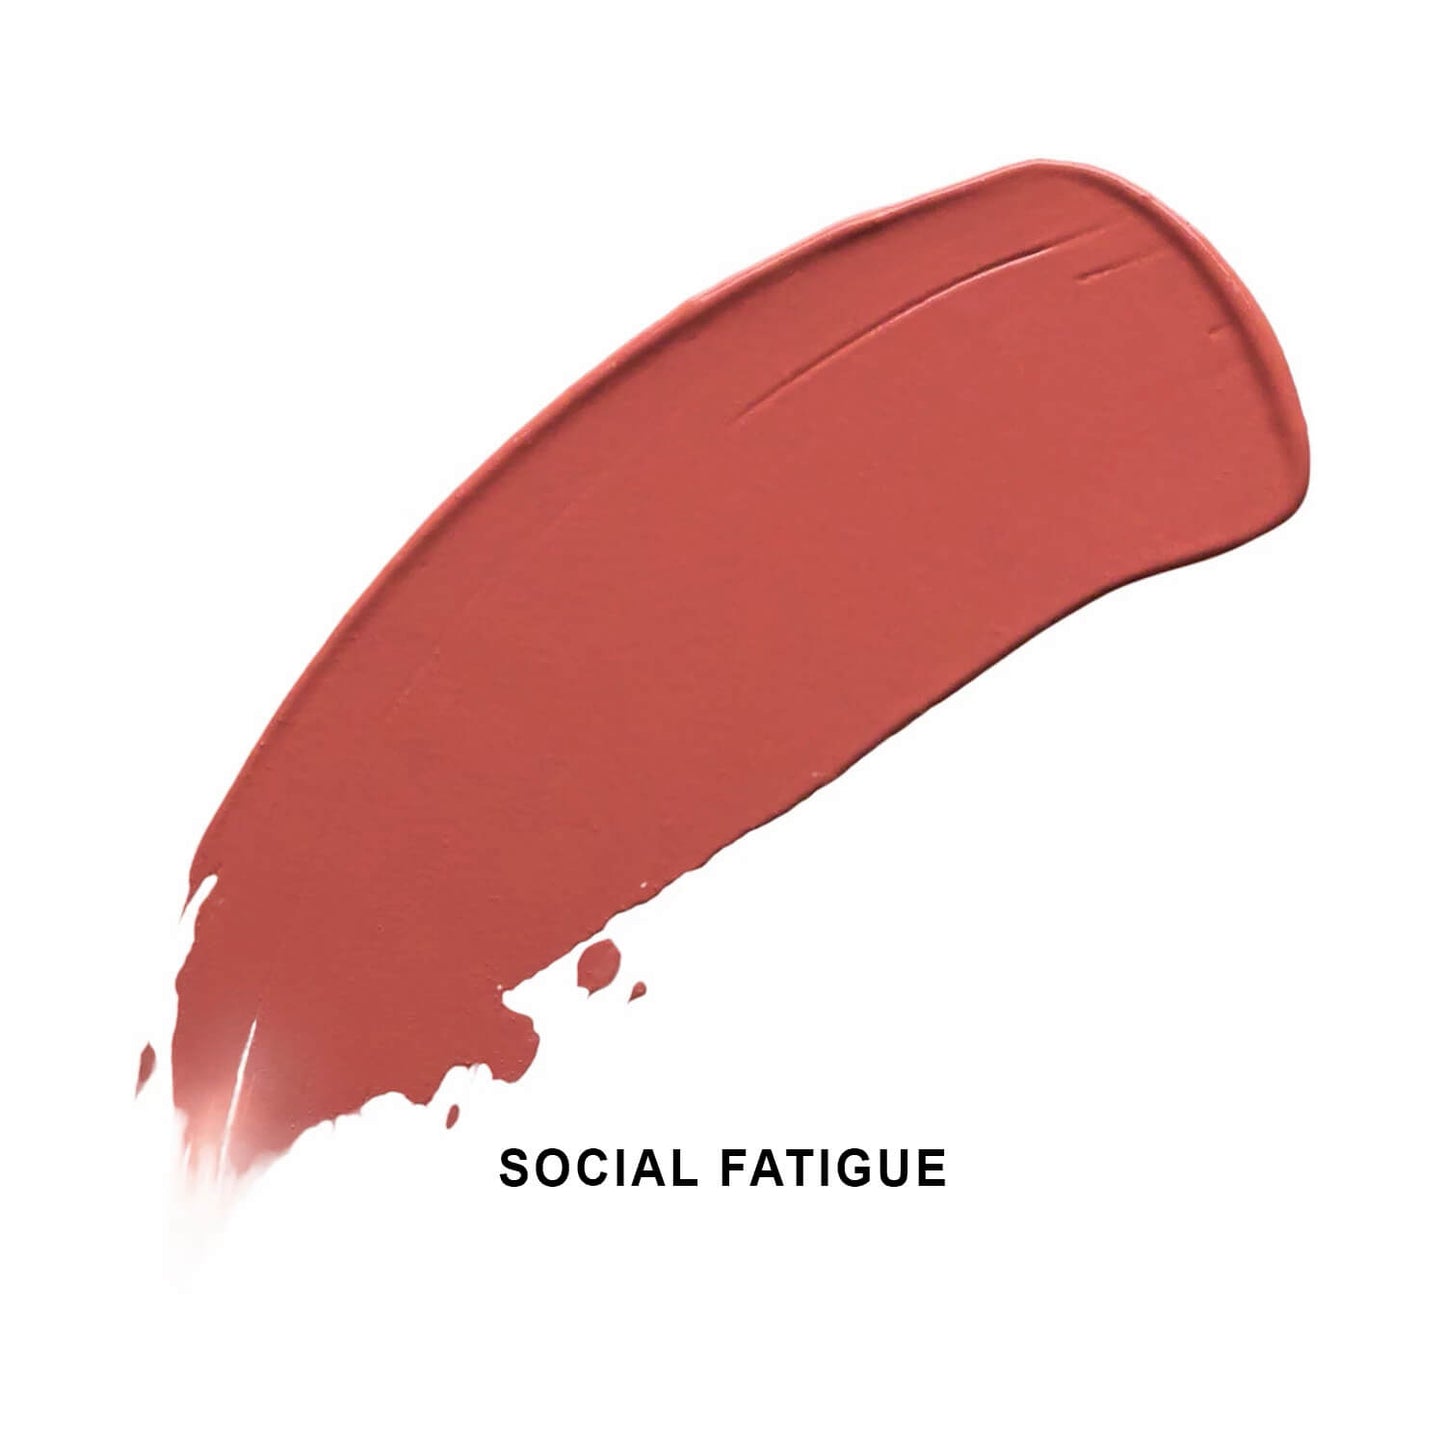 Too Faced Melted Matte Lipstick swatch available at heygirl.pk for delivery in Pakistan